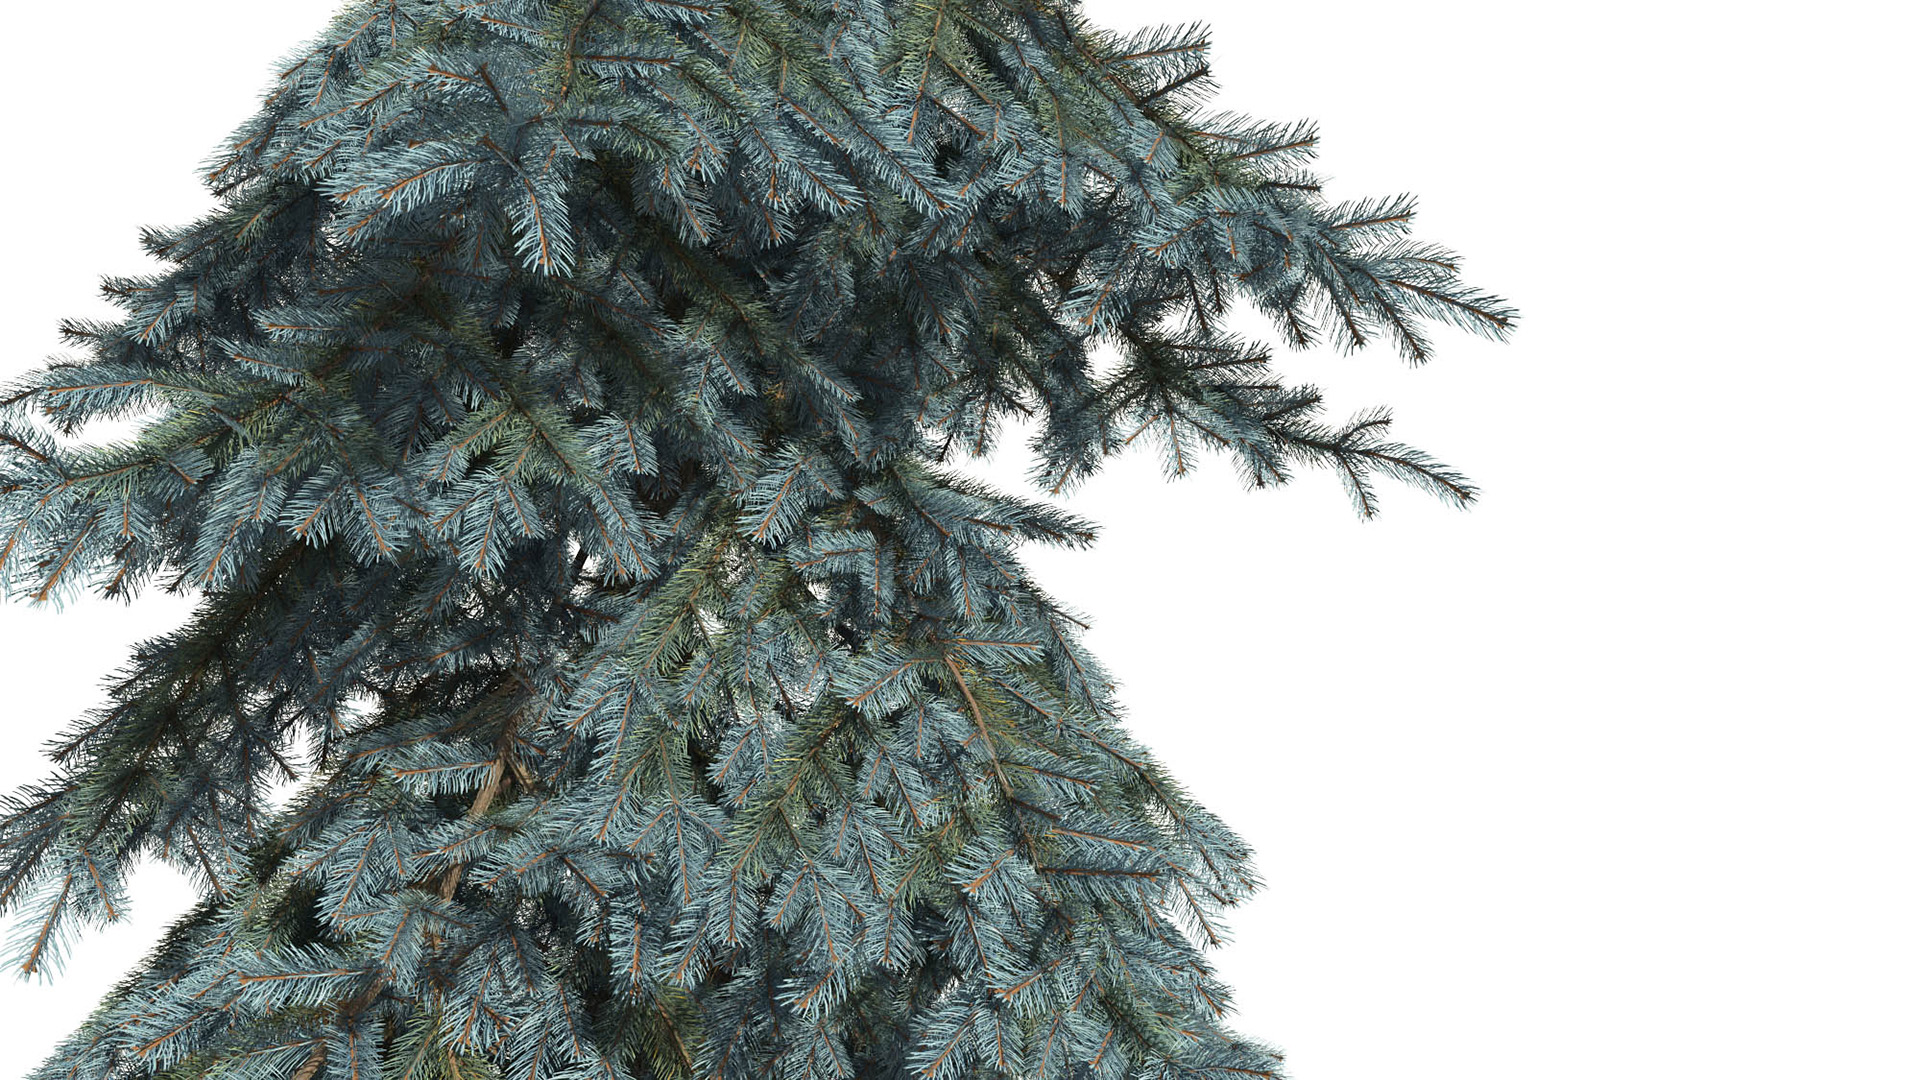 3D model of the Colorado Blue spruce Koster Picea pungens 